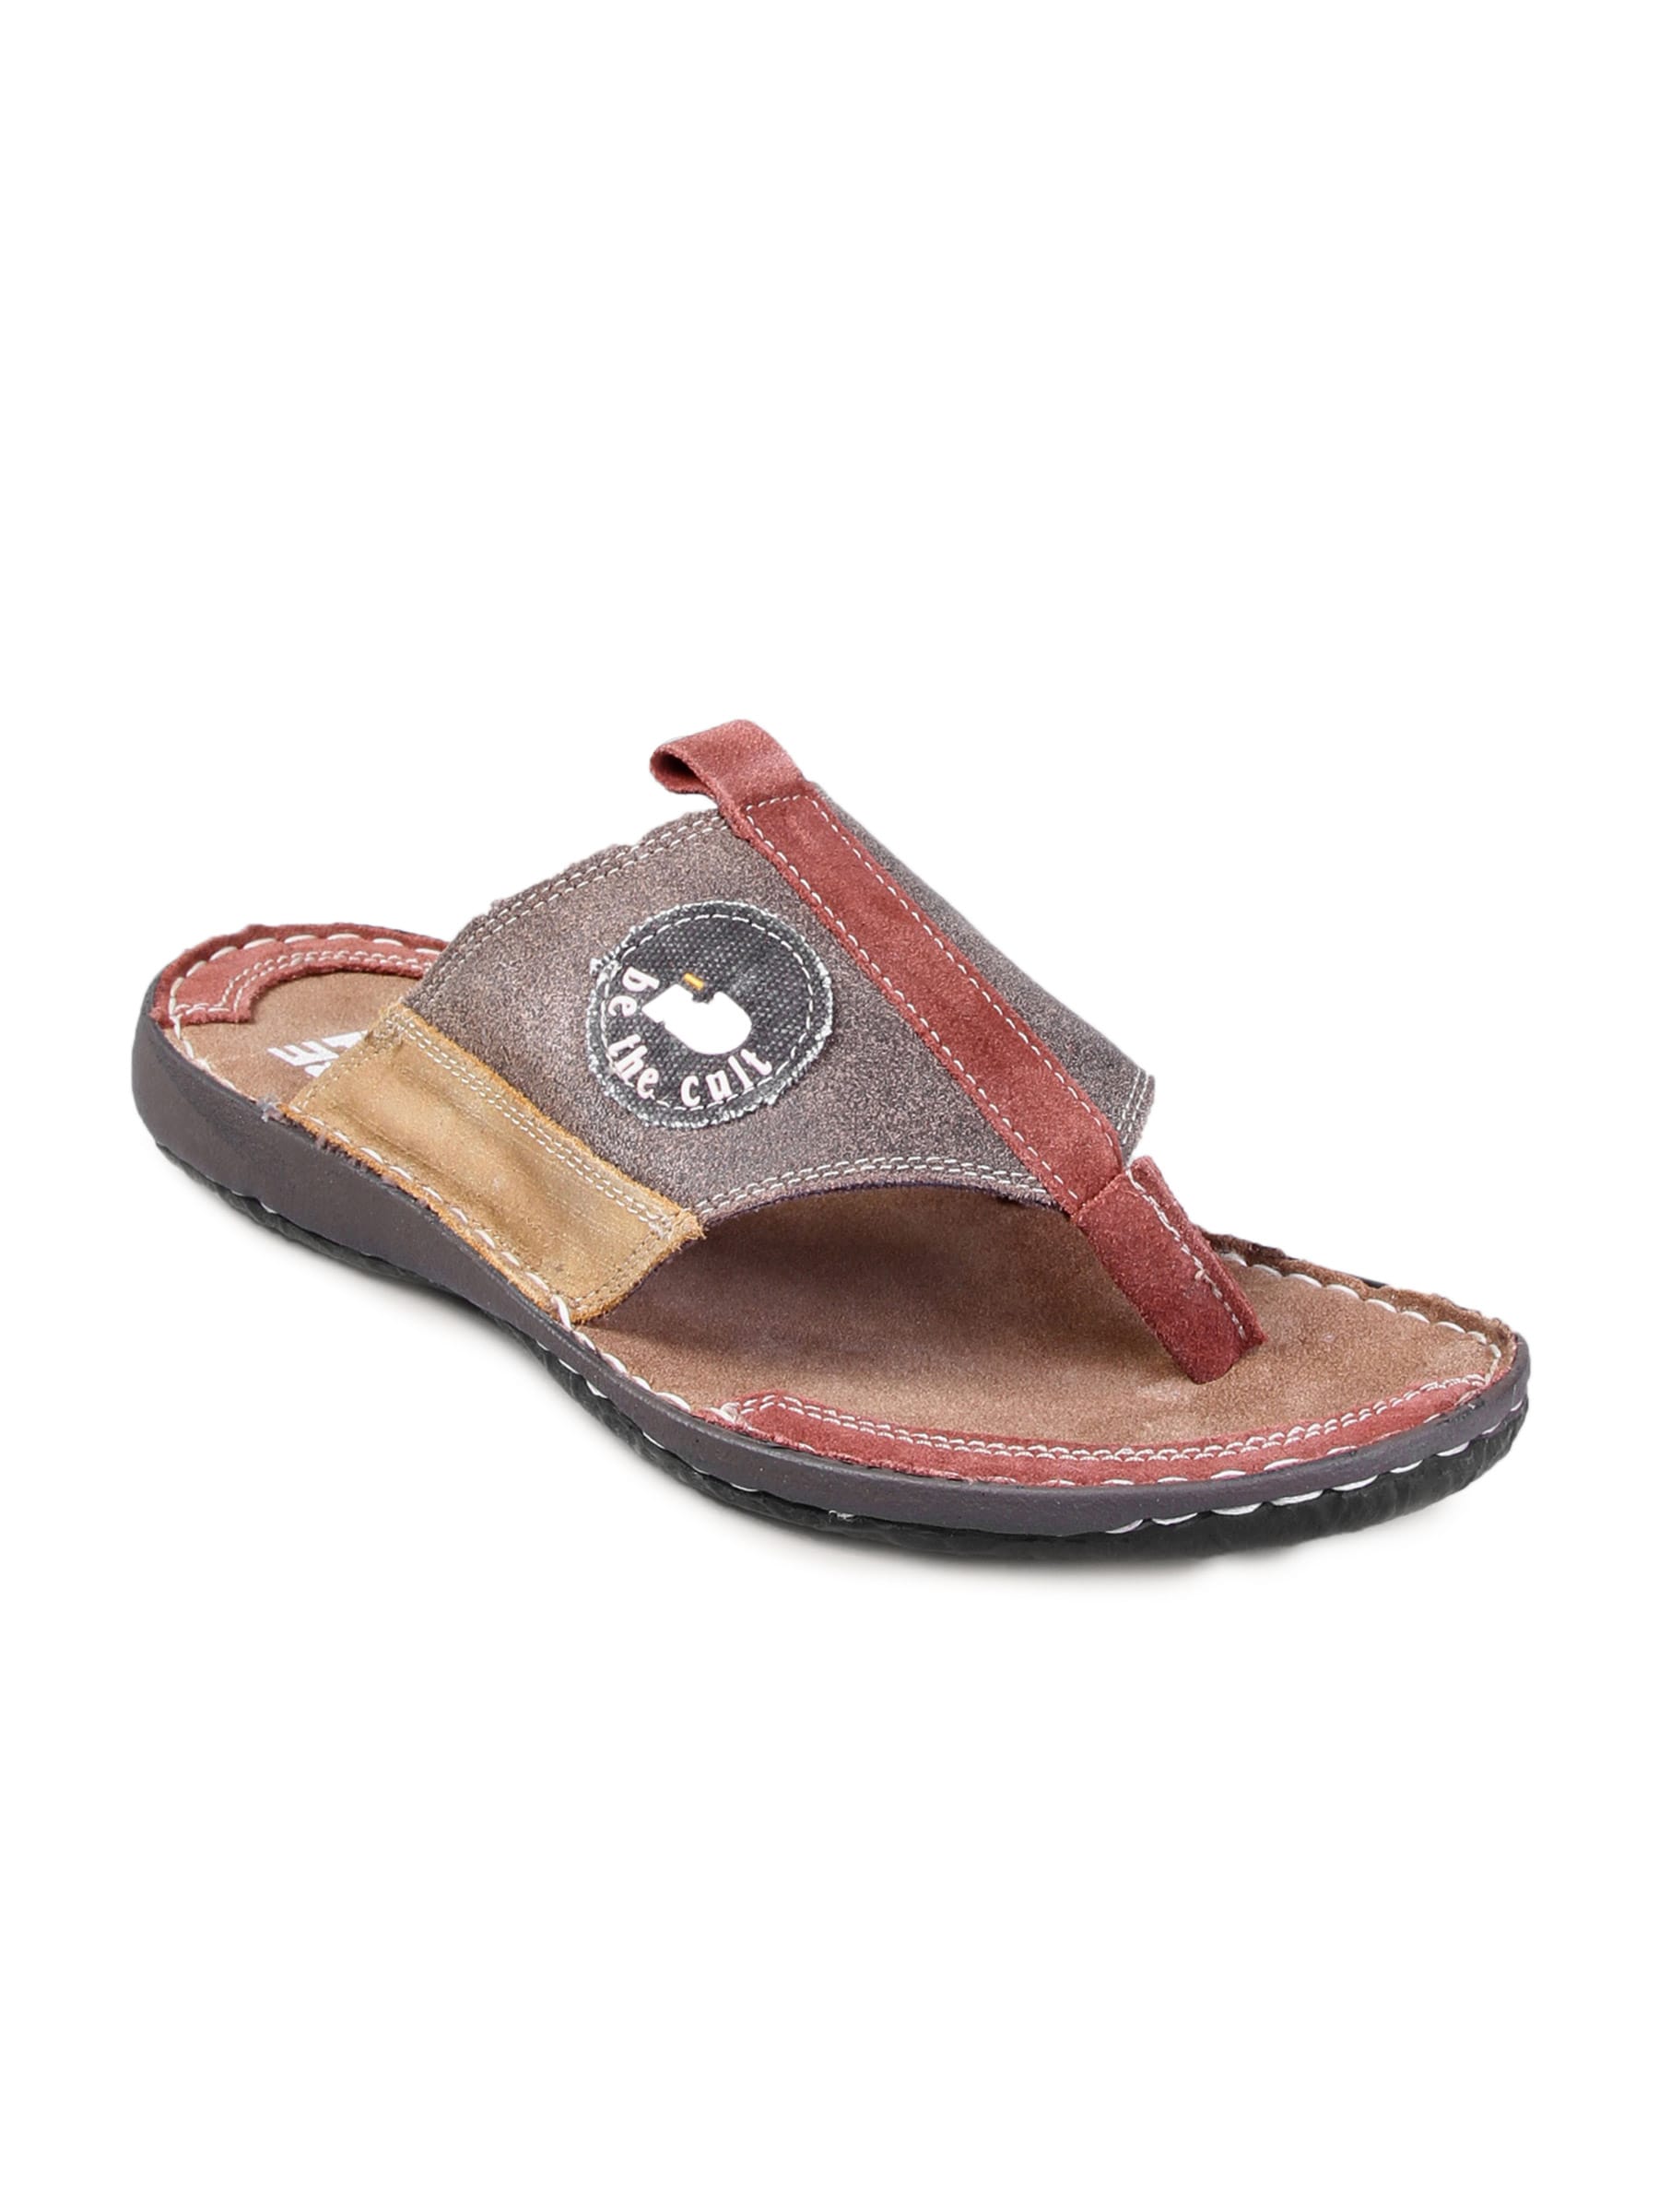 iD Men Casual Leather Tmber Sandal